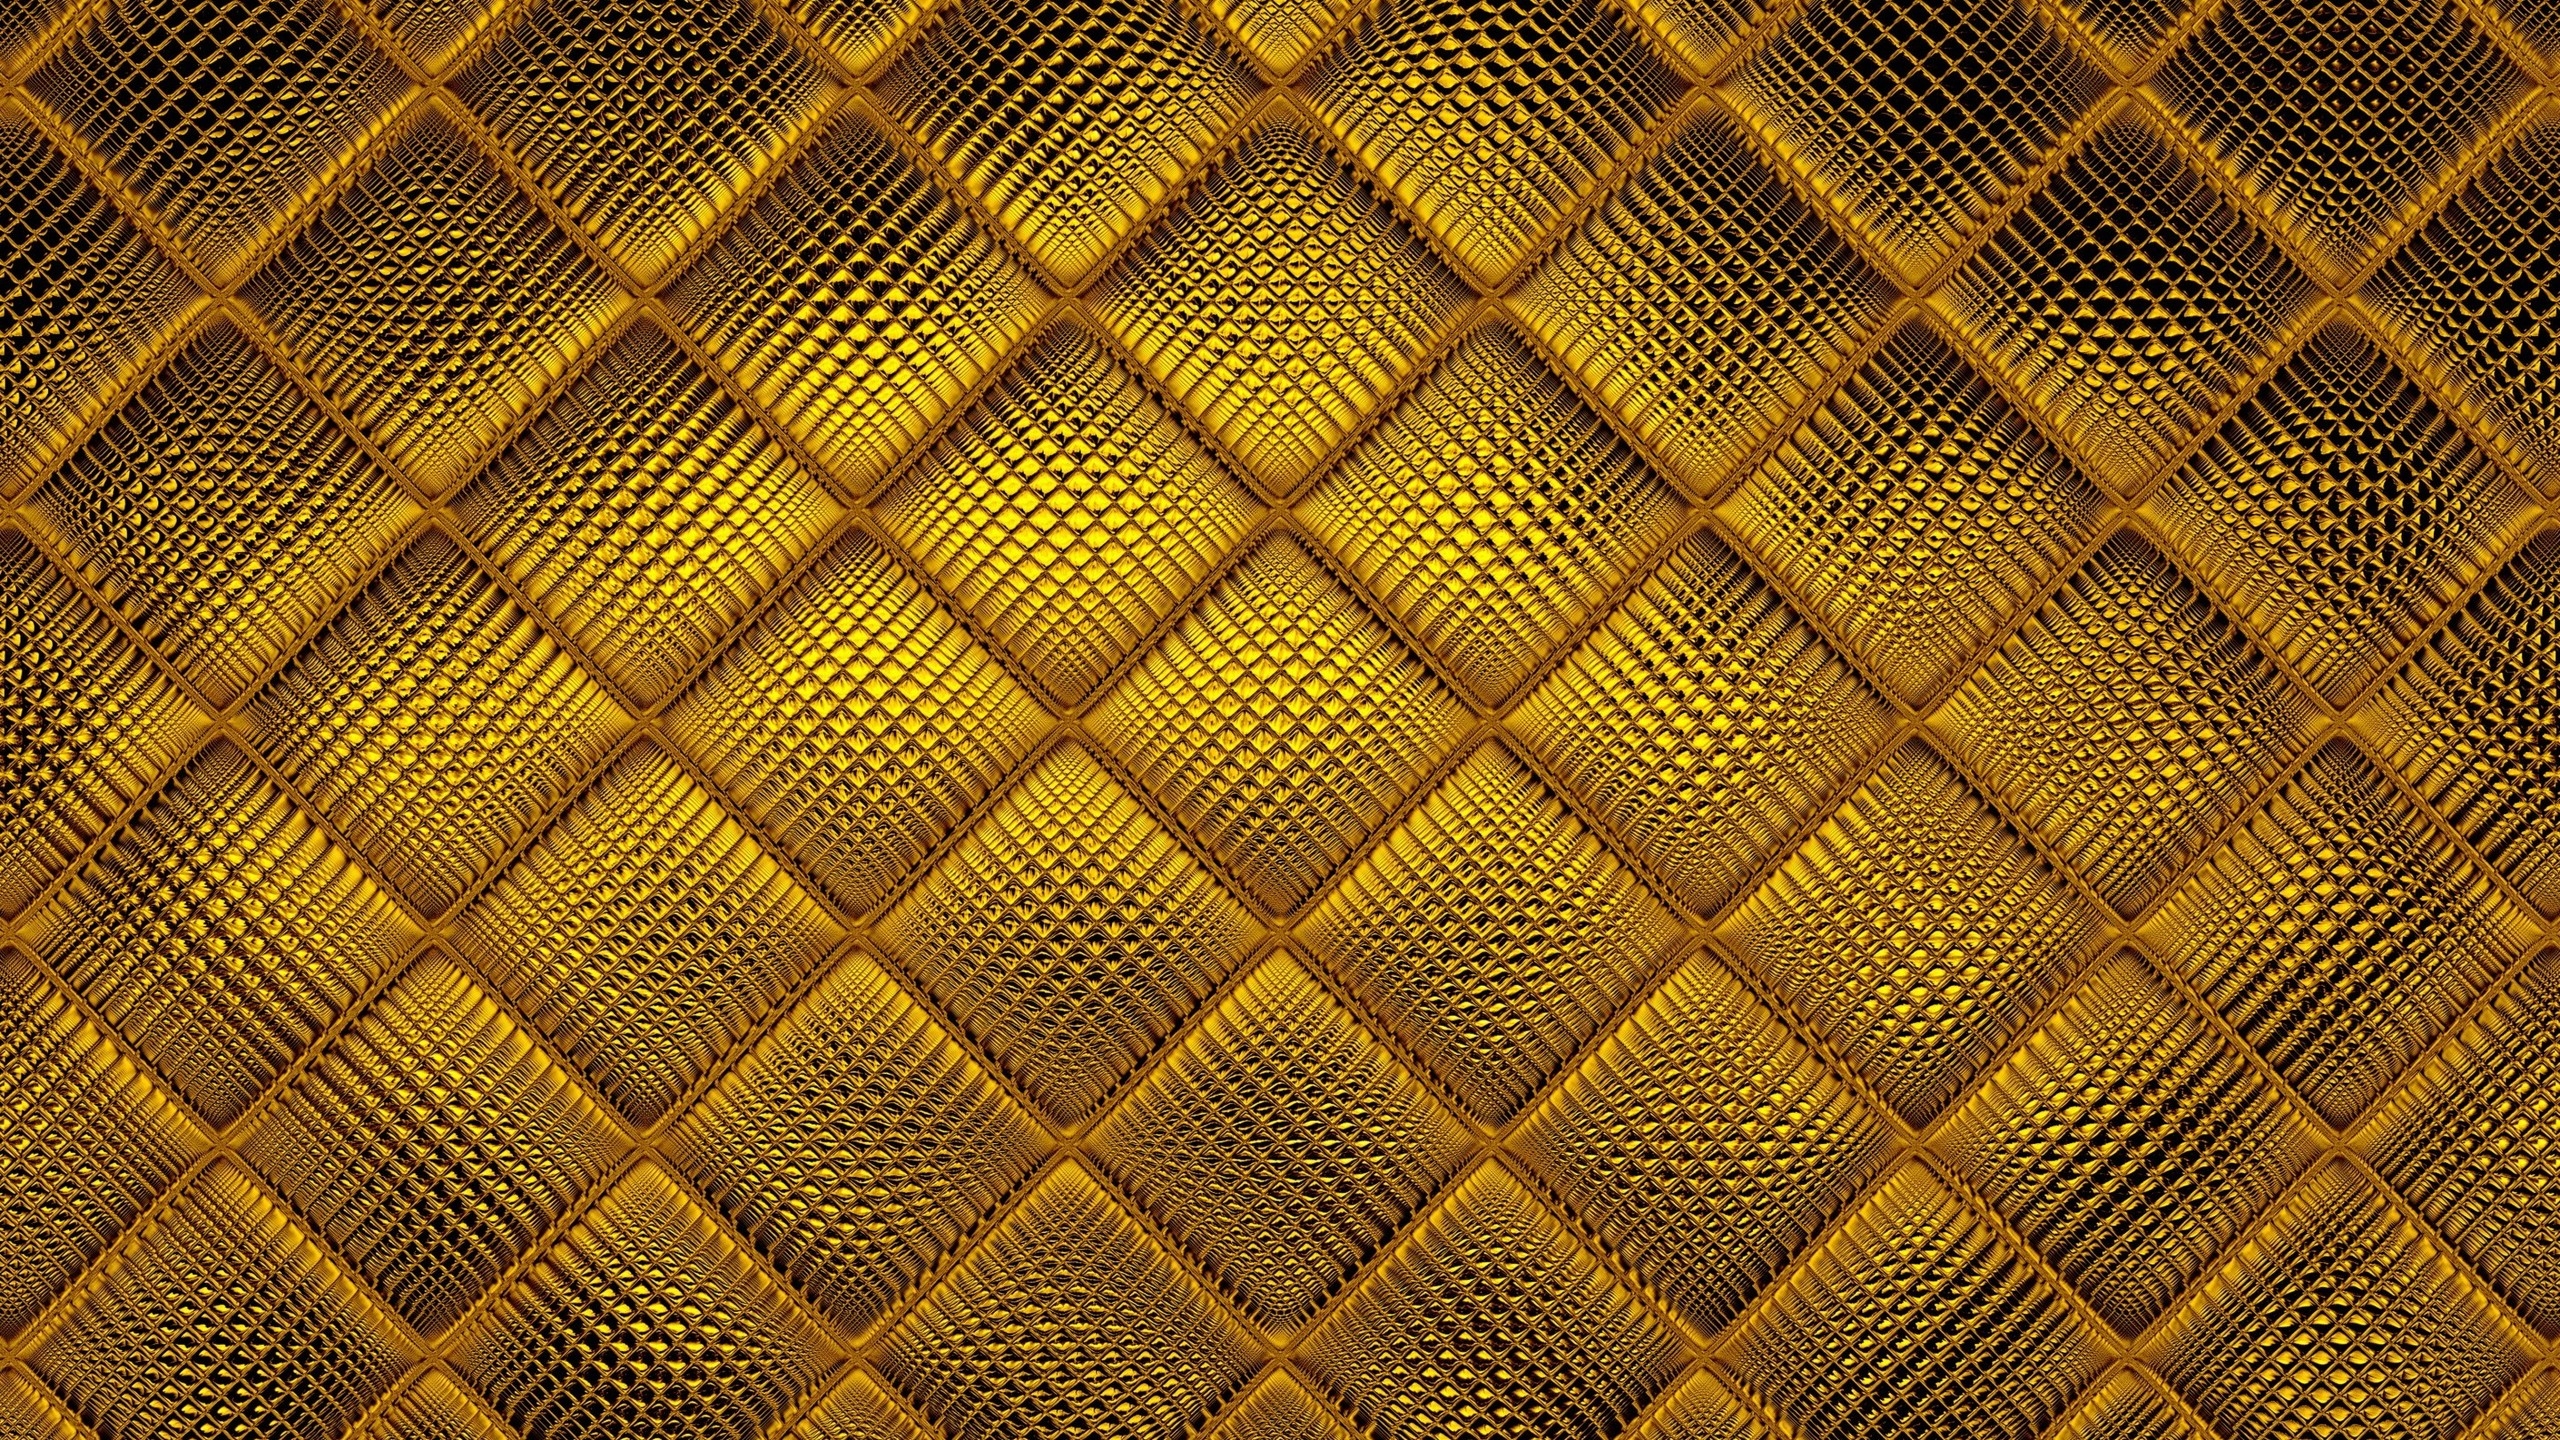 Gold Abstract Texture for 2560x1440 HDTV resolution